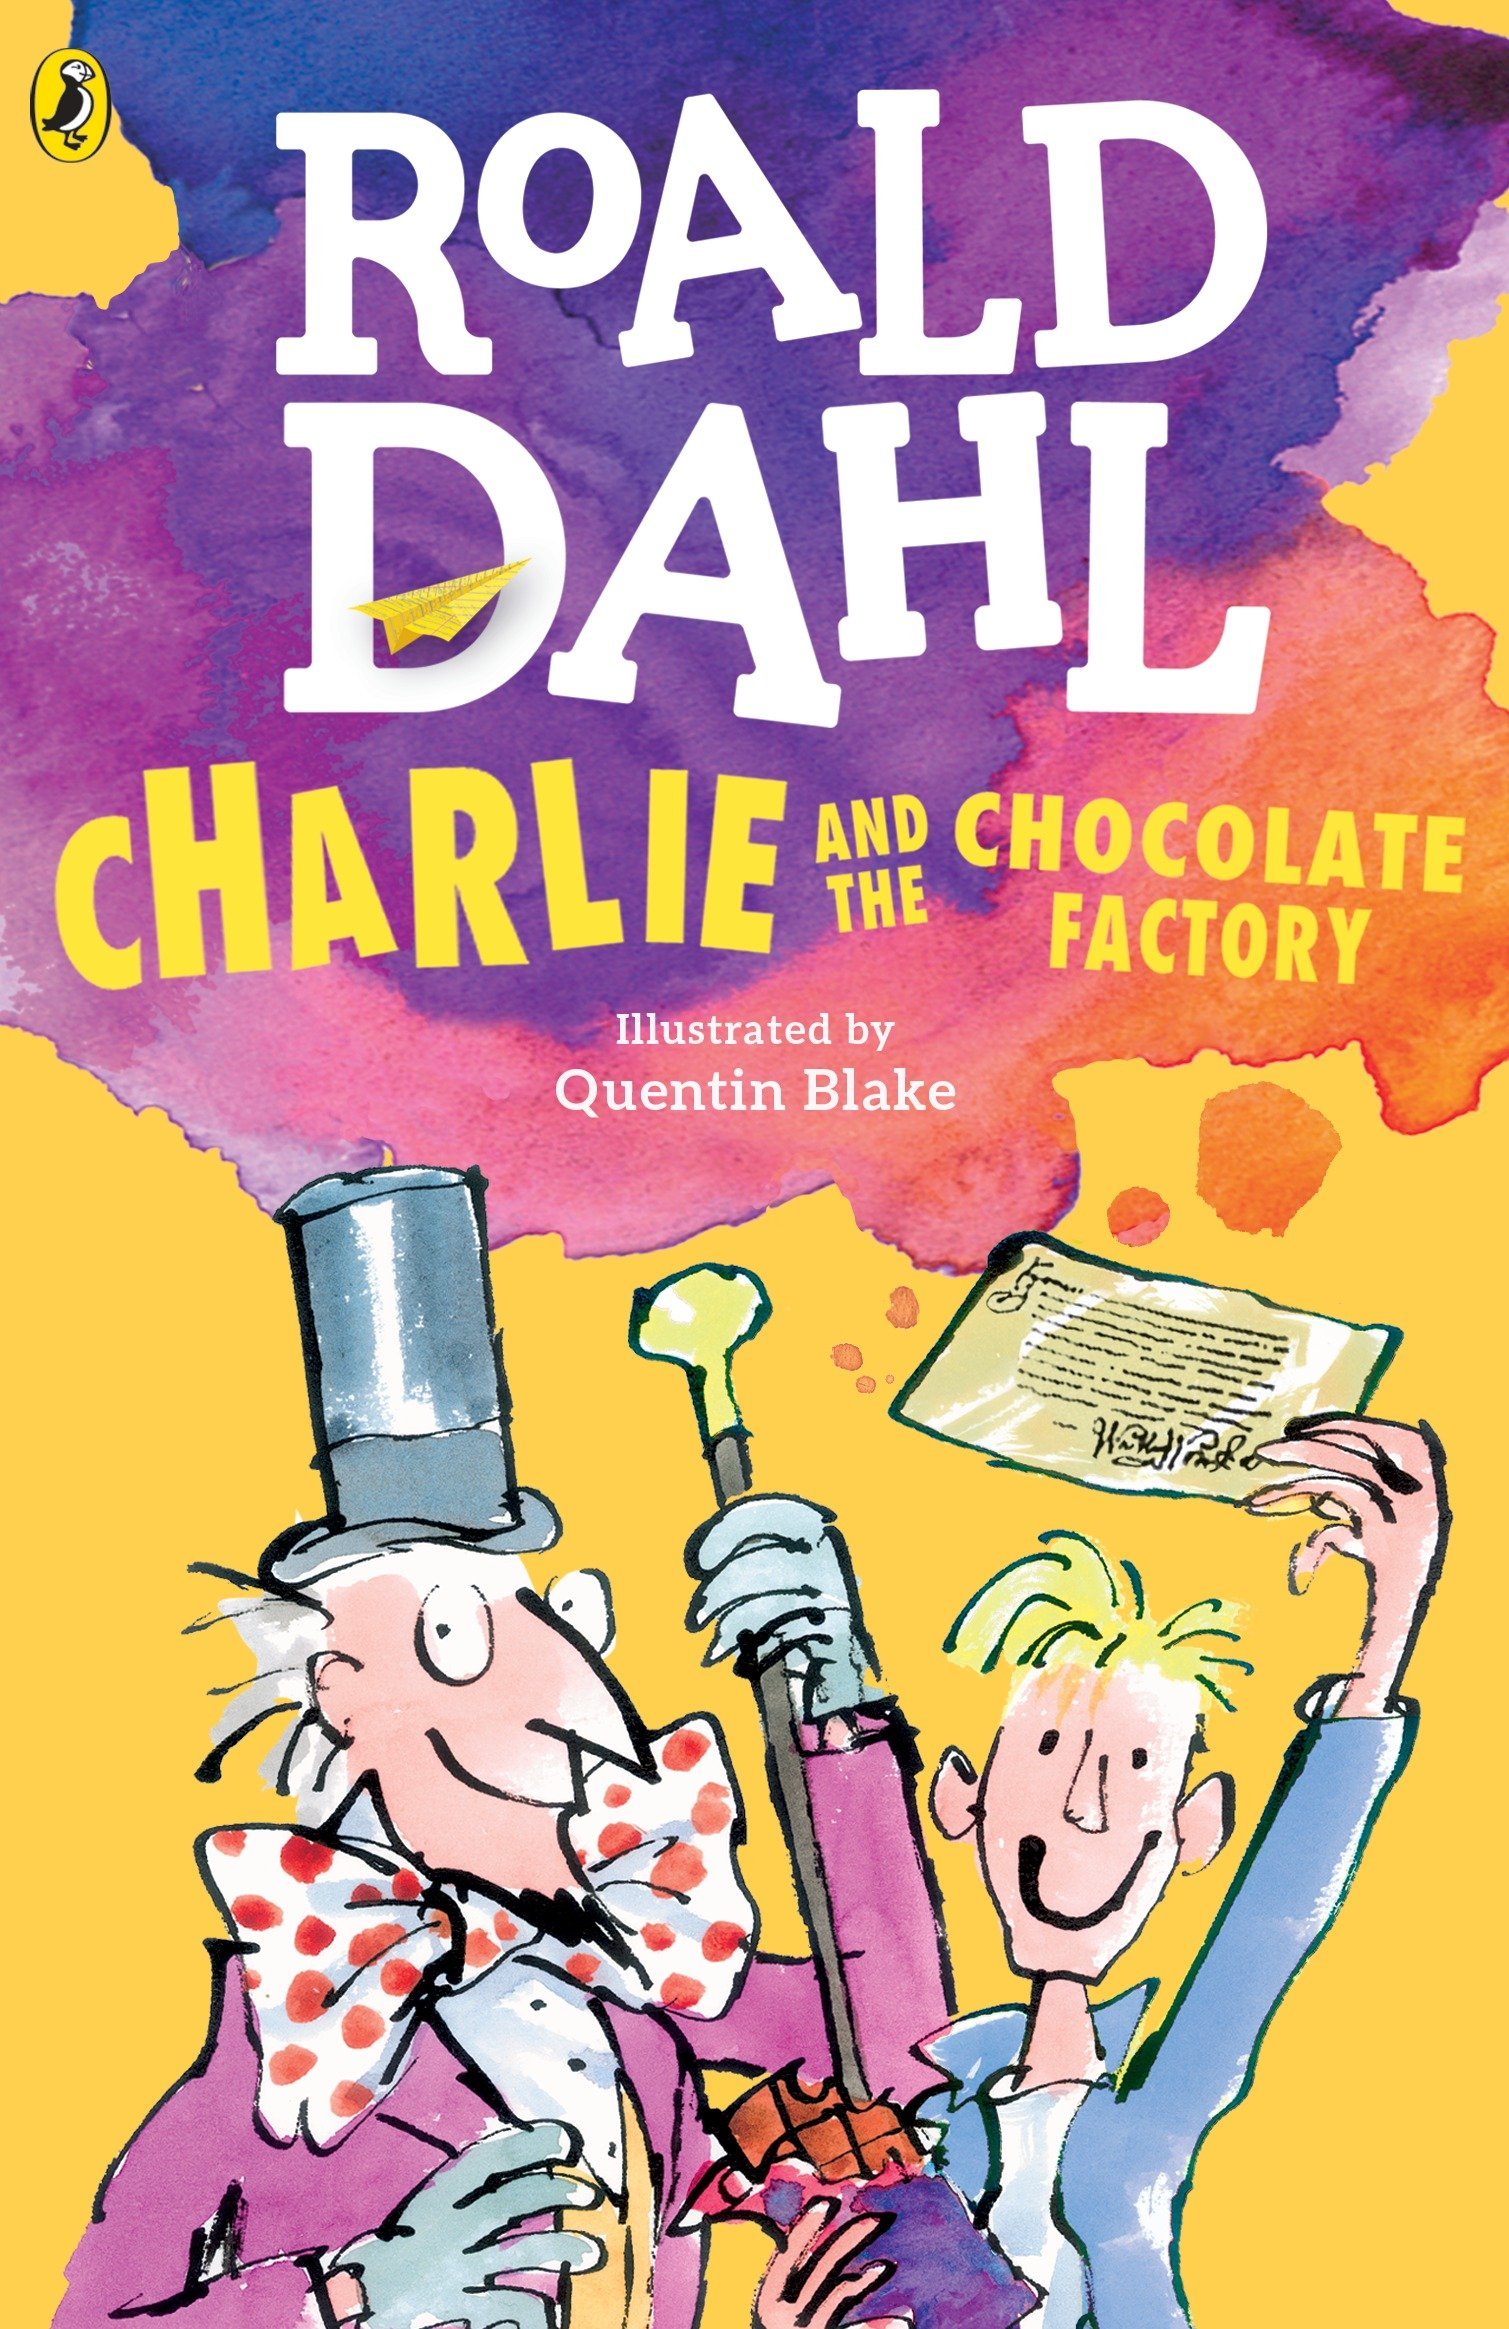 Roald Dahl Charlie and the Chocolate Factory